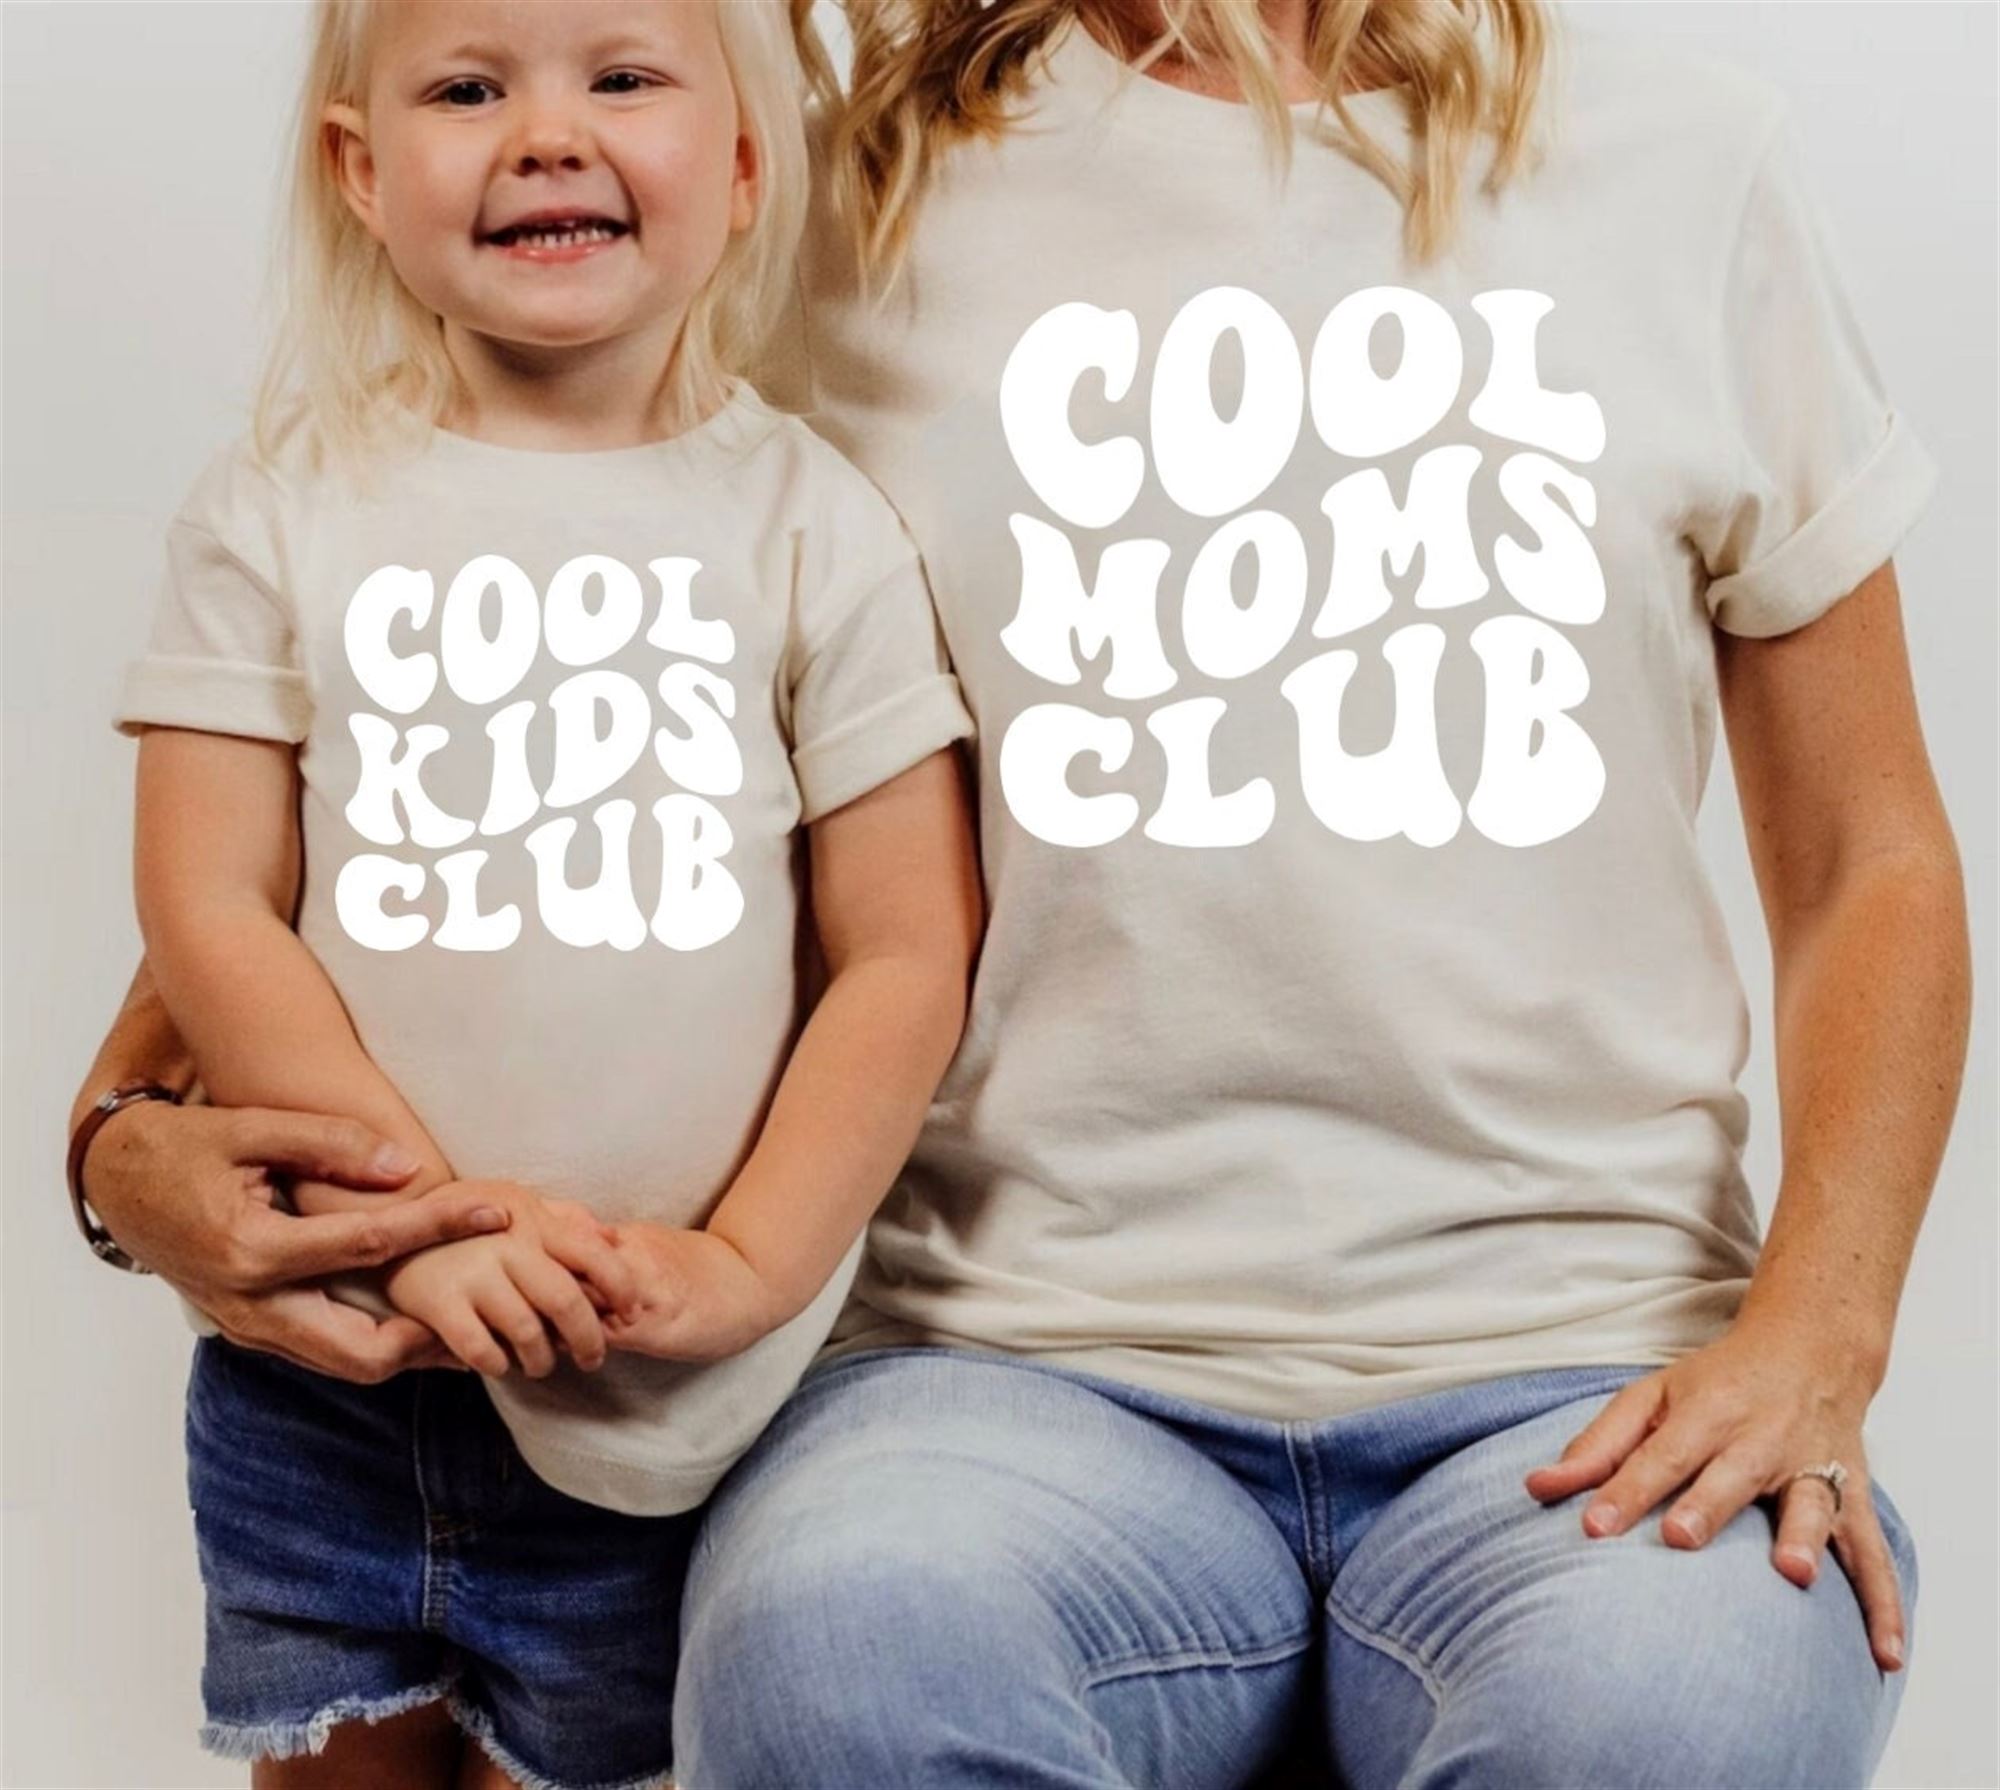 Awesome Mommy And Me Shirts Mother's Day Gift For Mom And Daughter Cool Mom Cool Kid Shirts Matching Mom And Son Shirts Gift For Mom Mama Shirt 